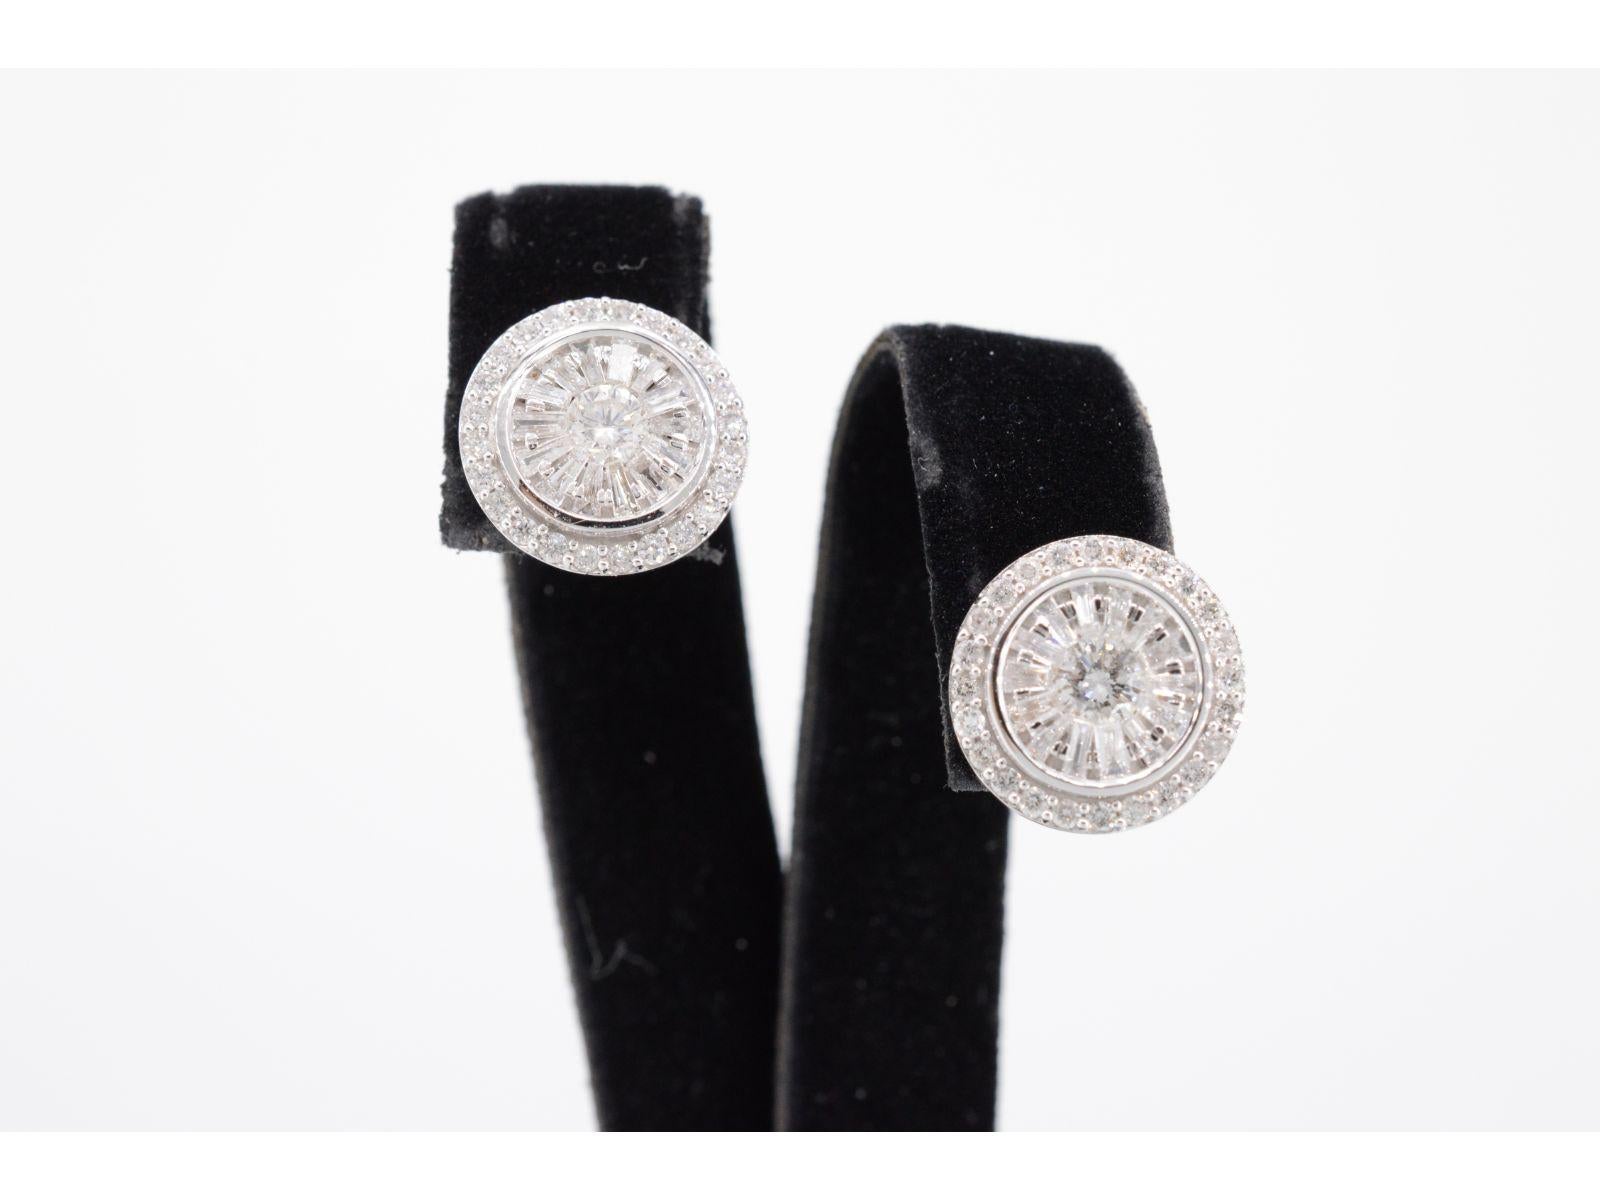 These stunning white gold entourage earrings are set with a combination of brilliant and baguette cut diamonds, totaling 1.20 carats. The diamonds are arranged in a striking entourage setting, creating a captivating display of light and sparkle. The